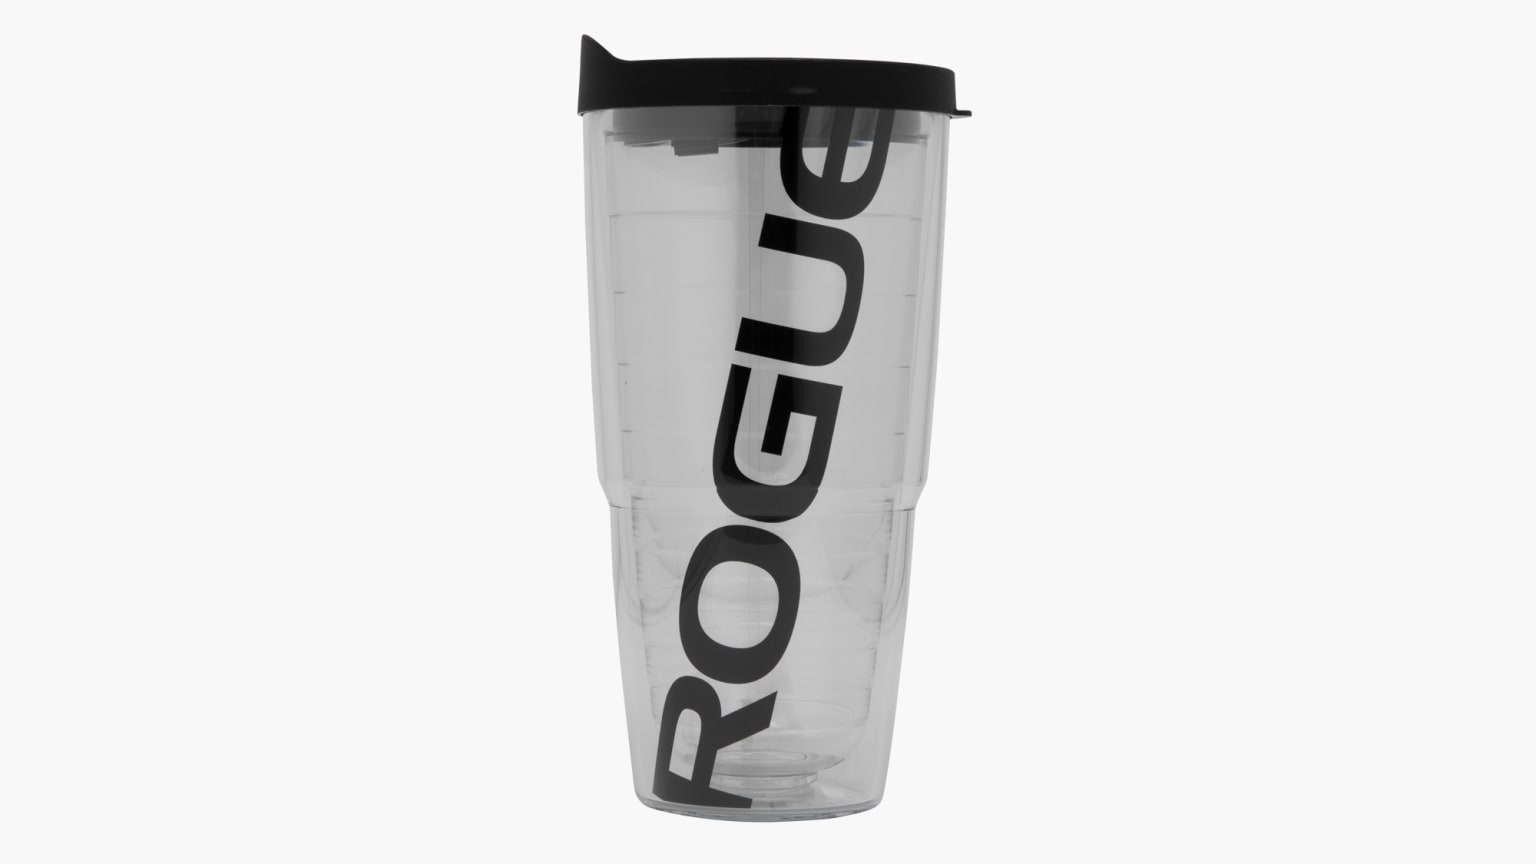 https://assets.roguefitness.com/f_auto,q_auto,c_limit,w_1536,b_rgb:f8f8f8/catalog/Gear%20and%20Accessories/Accessories/Shakers%20and%20Bottles/TV0002/TV0002-H_nzkt6o.png